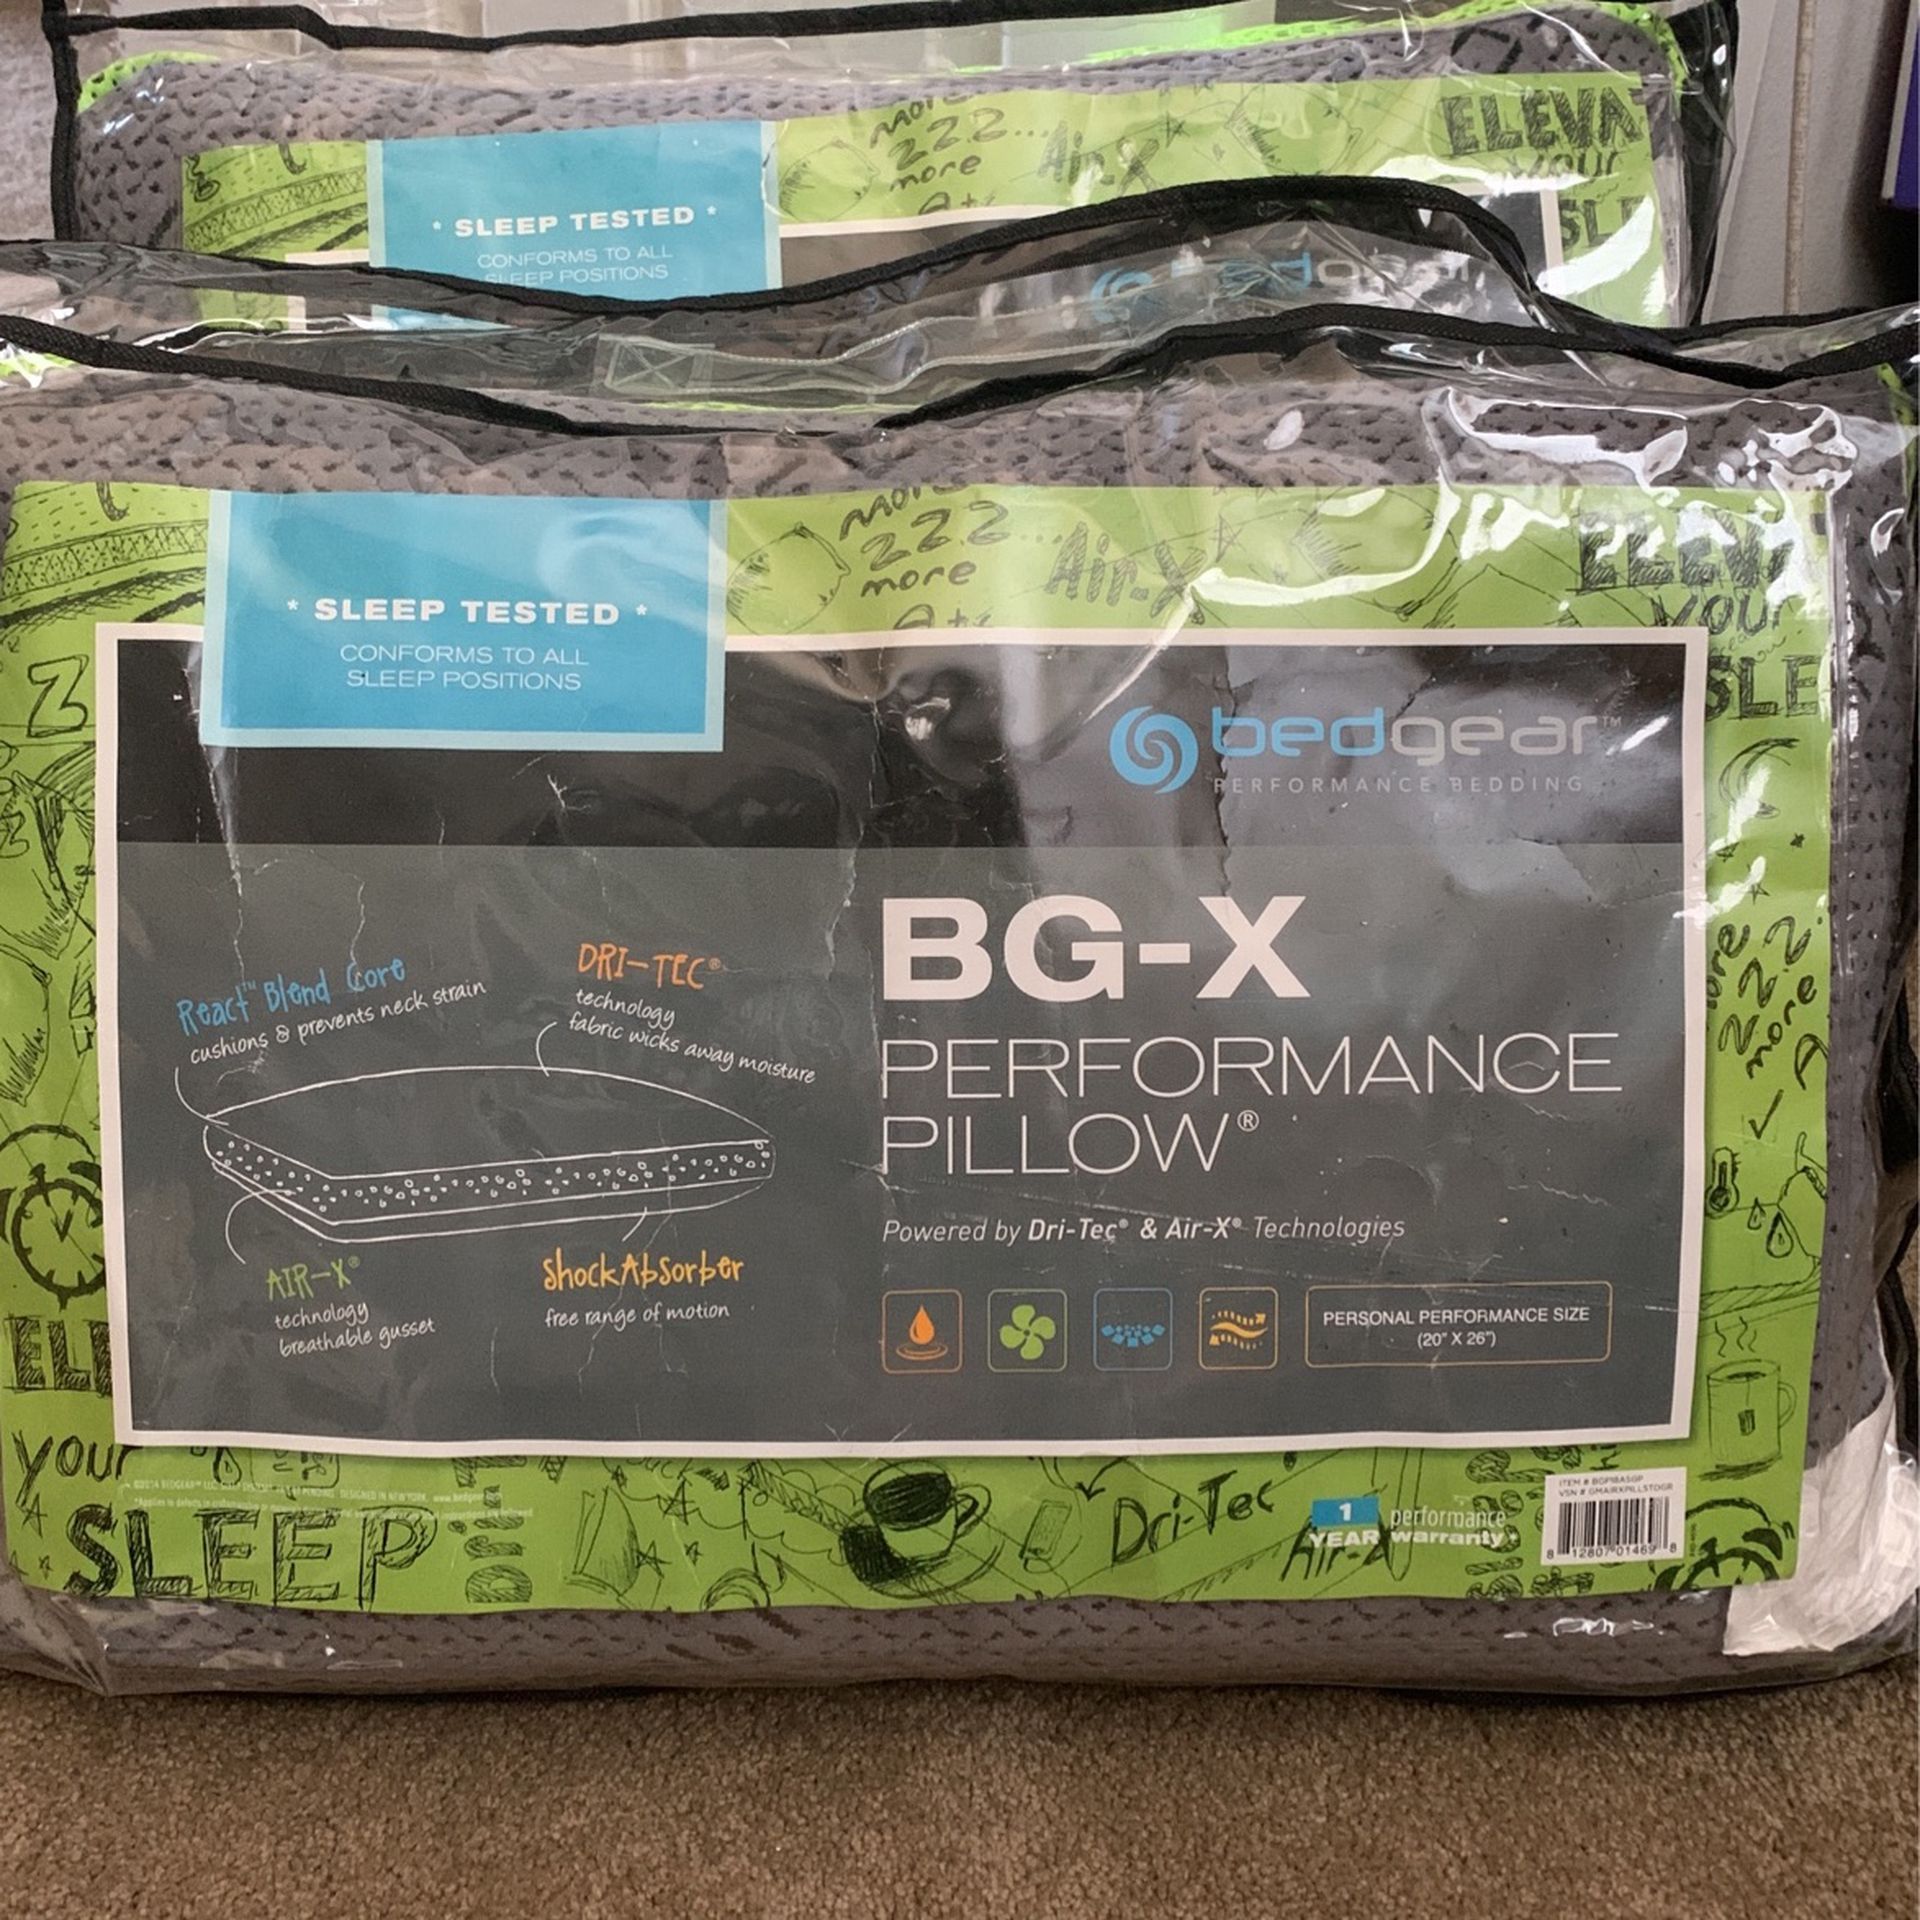 Bedgear Performance Pillows, NEW. Not Used .